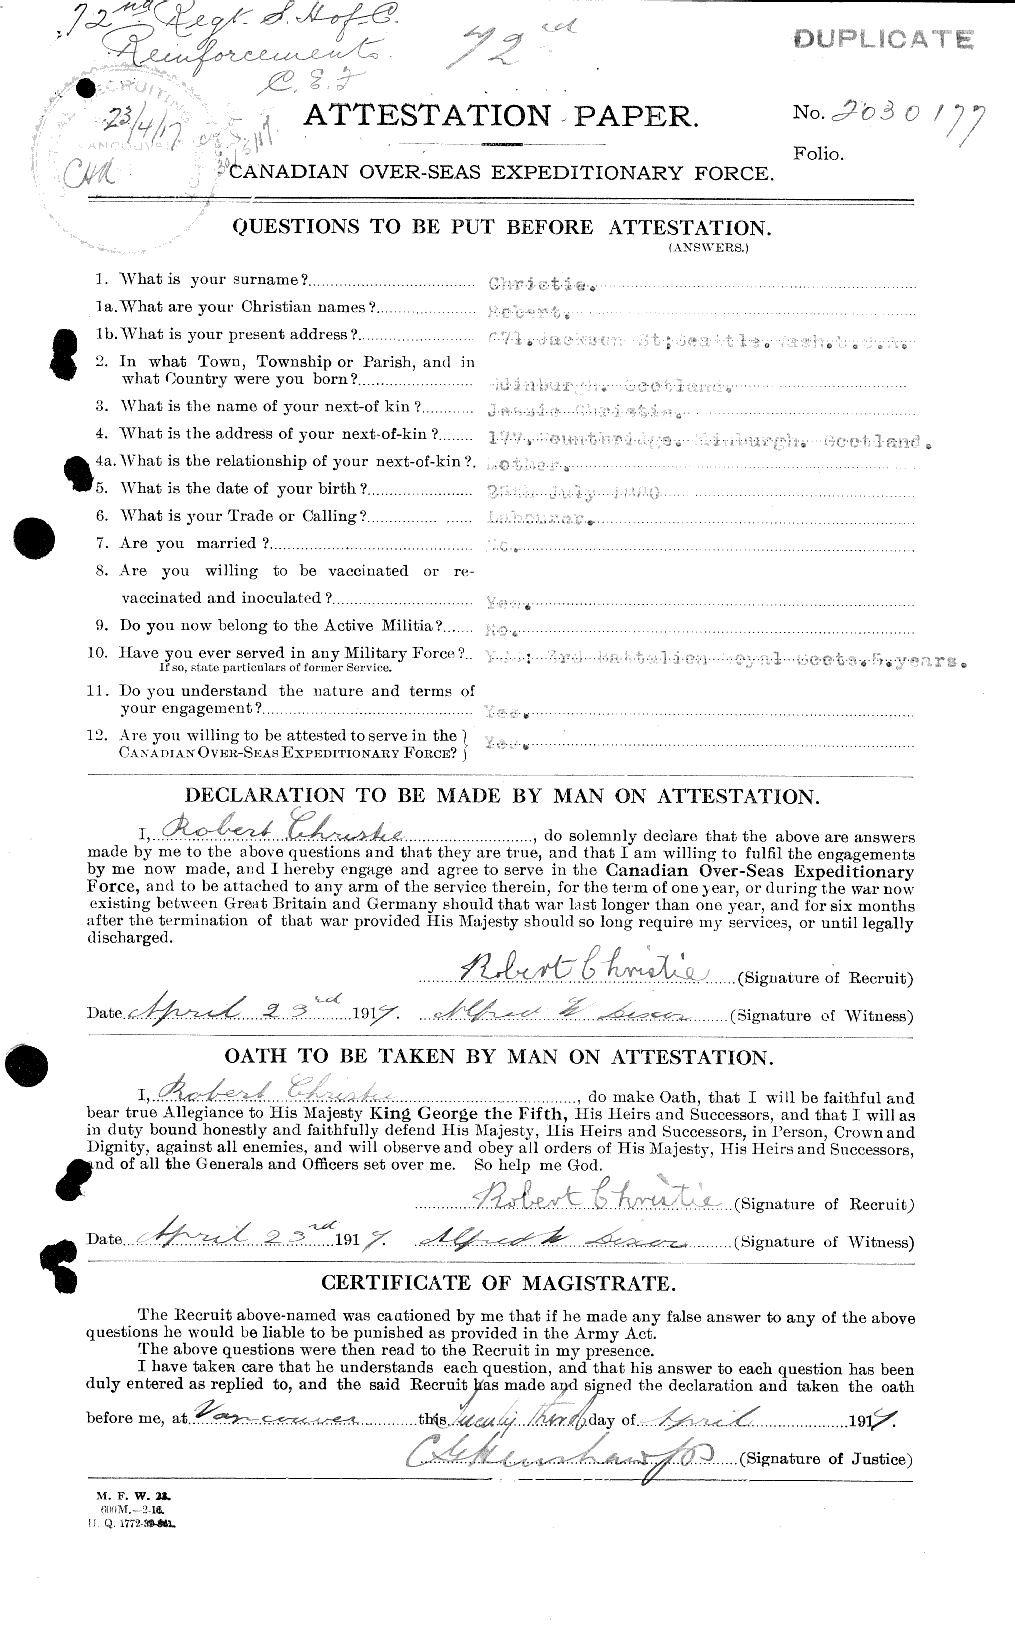 Personnel Records of the First World War - CEF 022053a